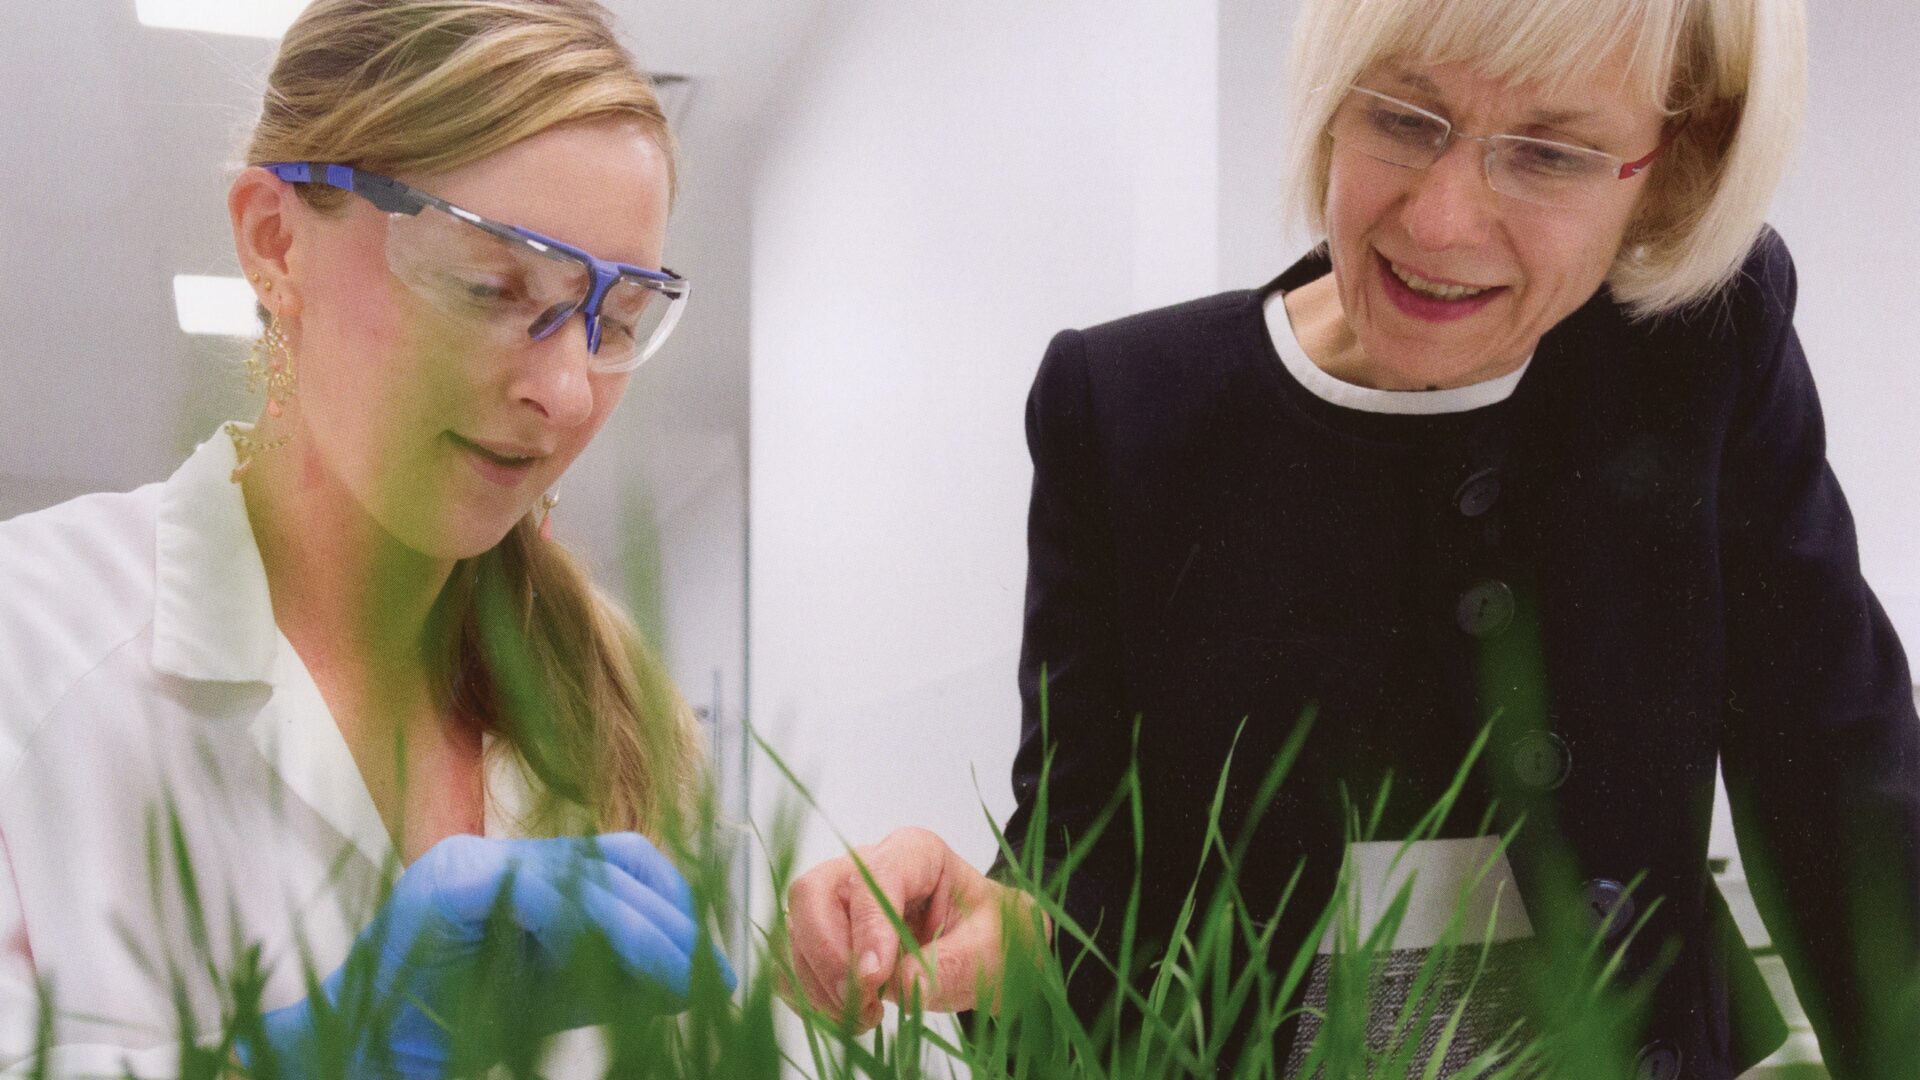 A person in a white lab coat studies some plant samples up close, next to her Deborah Terry looks over and is smiling. She has short blond hair and glasses.